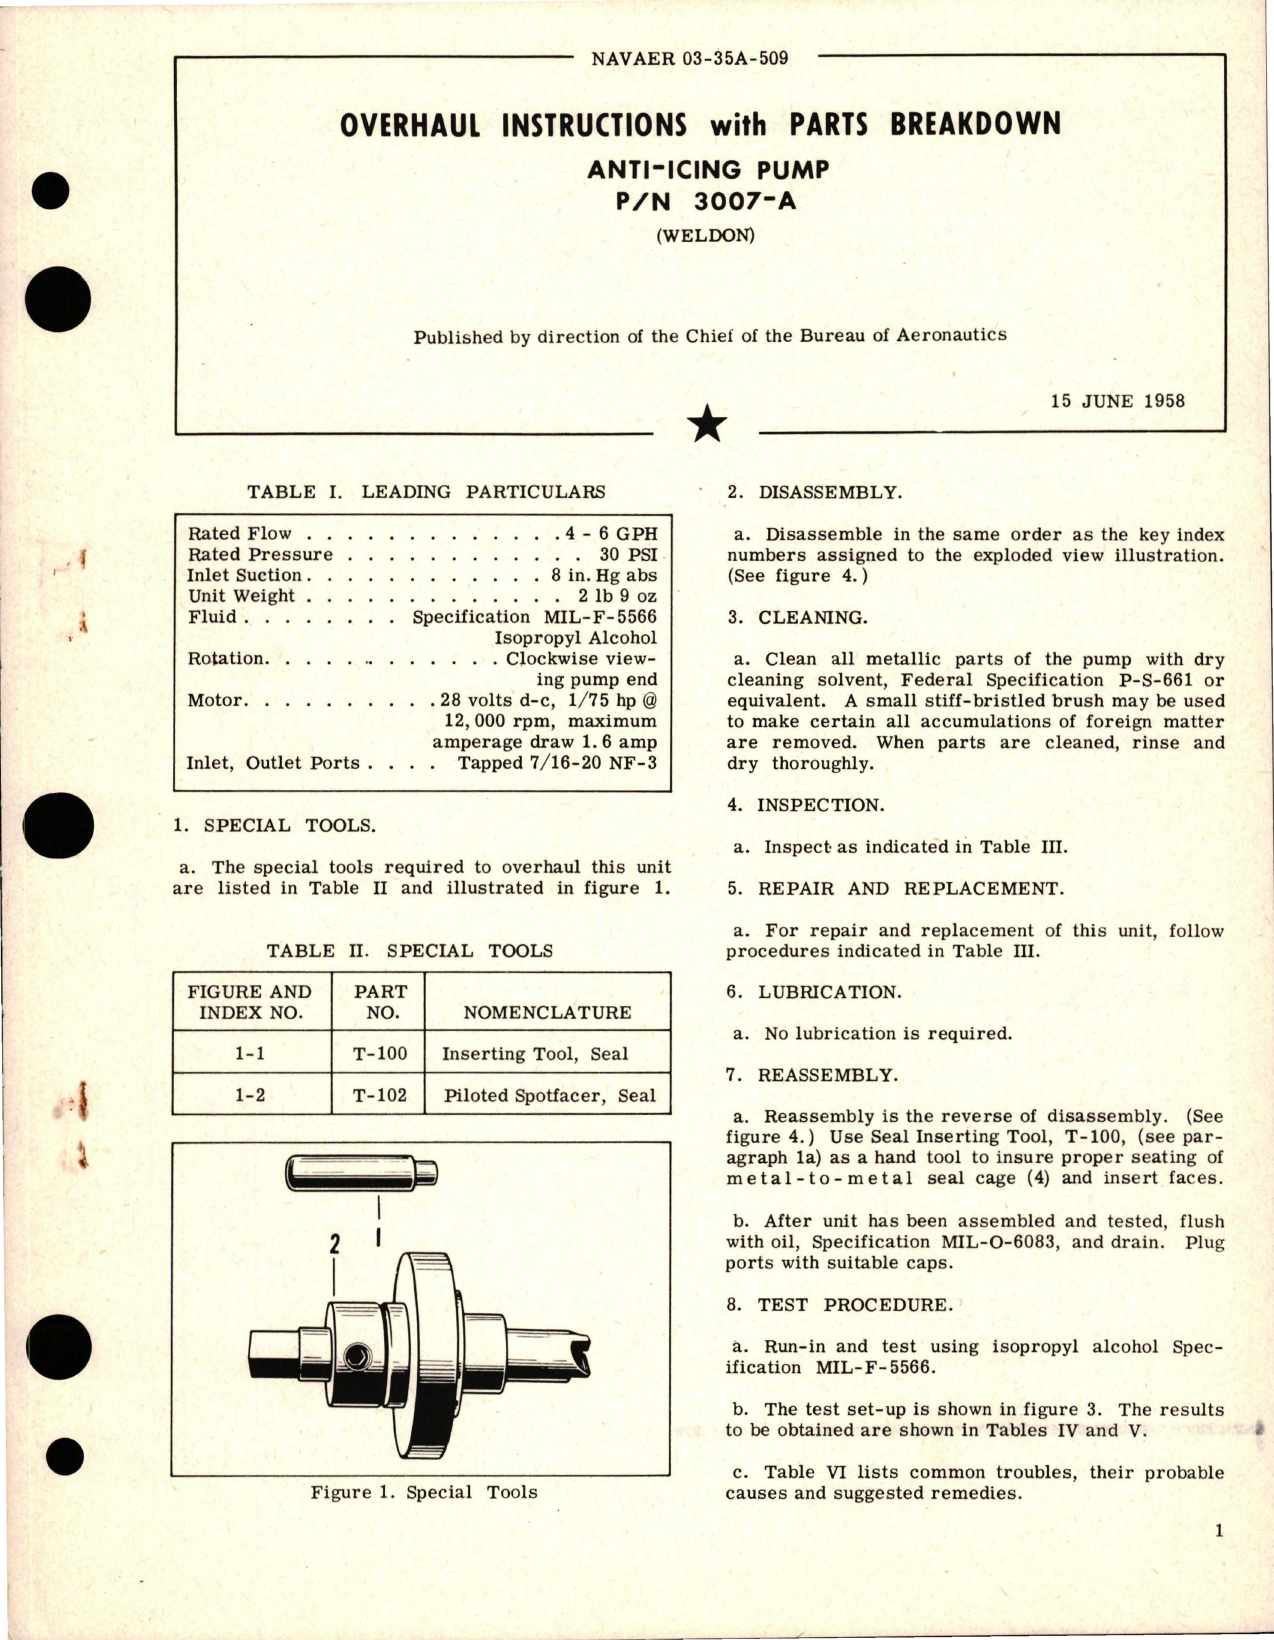 Sample page 1 from AirCorps Library document: Overhaul Instructions with Parts Breakdown for Anti-Icing Pump - Part 3007-A 